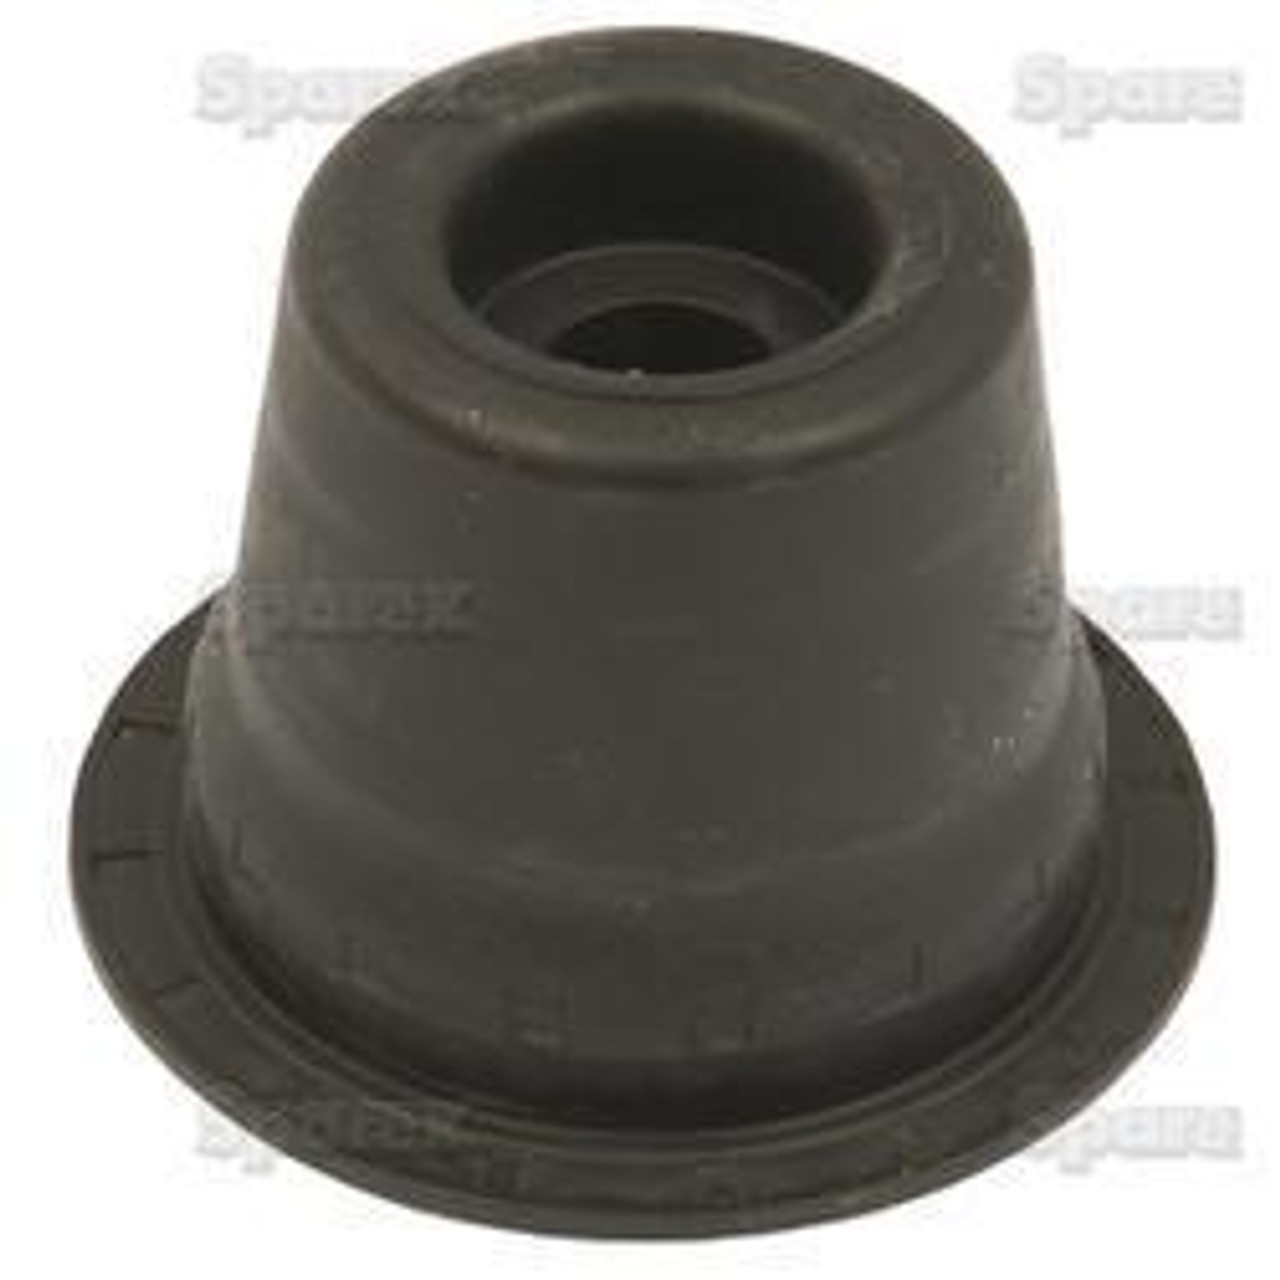 Brake Rod Boot for MF Tractor 1667175m1